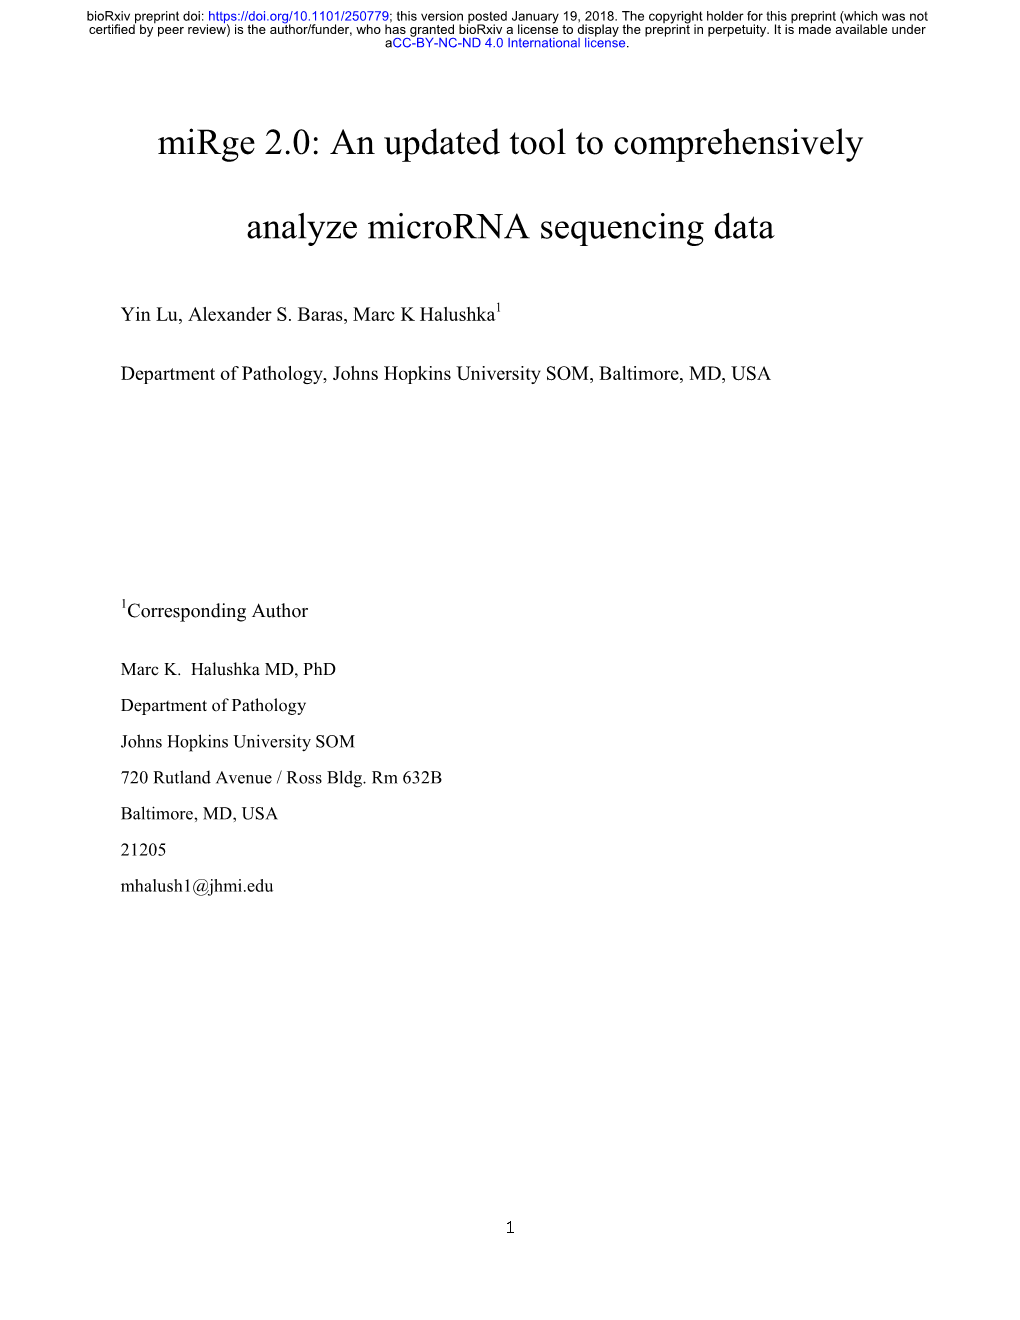 An Updated Tool to Comprehensively Analyze Microrna Sequencing Data